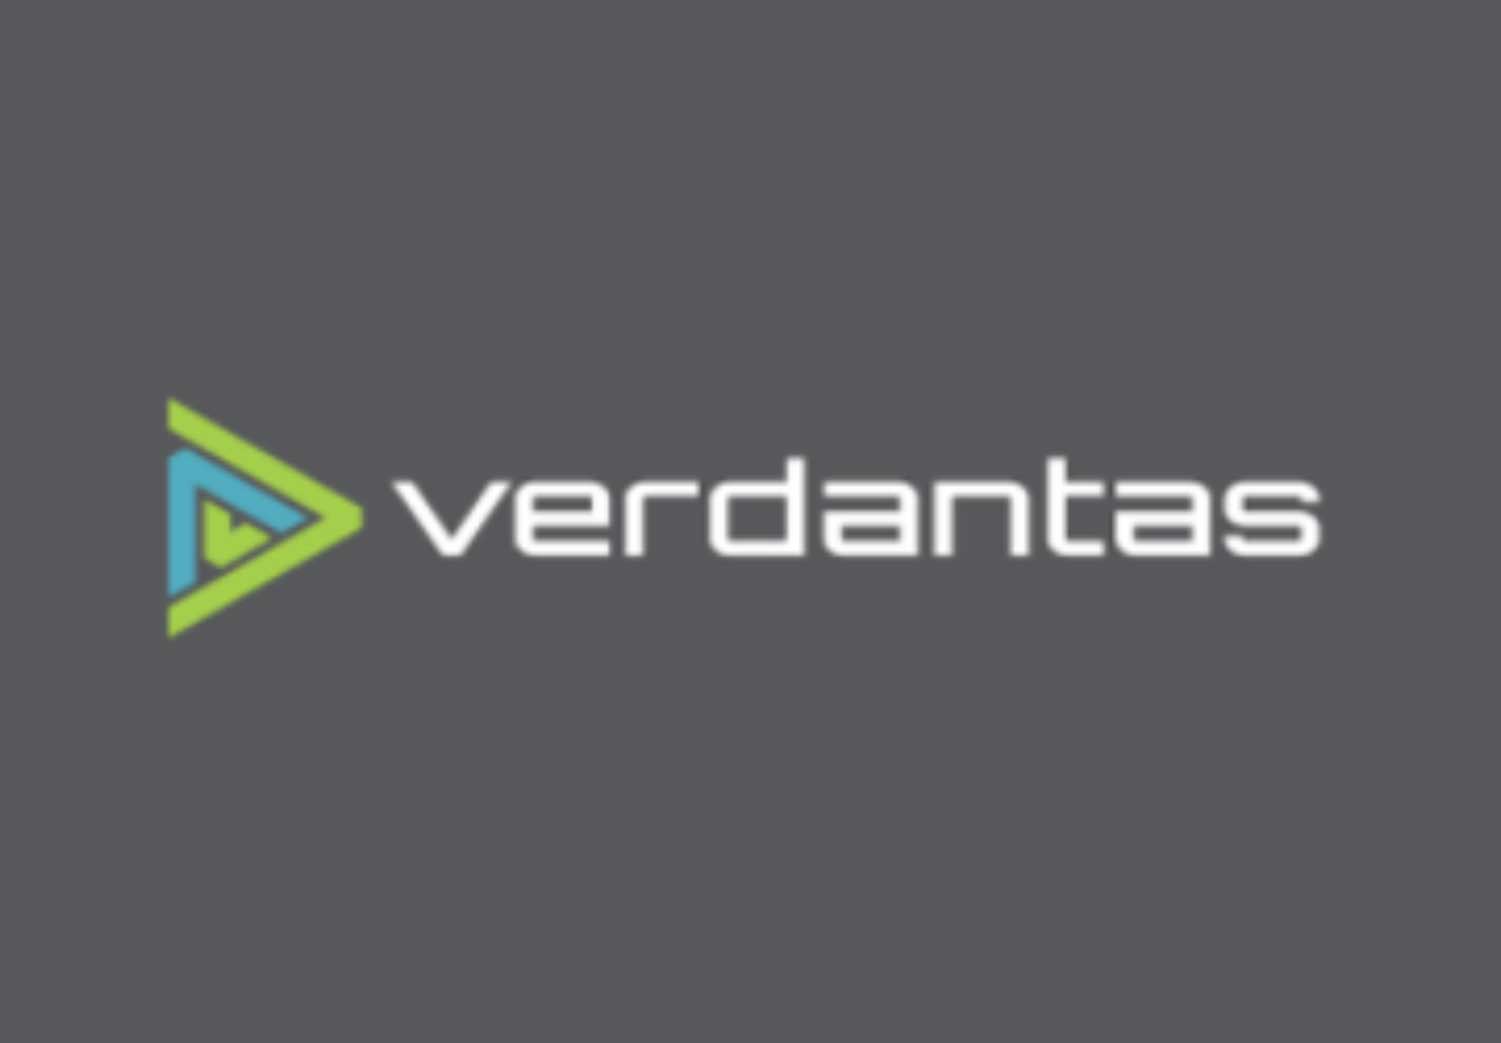 Verdantas Launches as Opportunity for Engineers, Scientists & Technical Experts to Build a Tomorrow